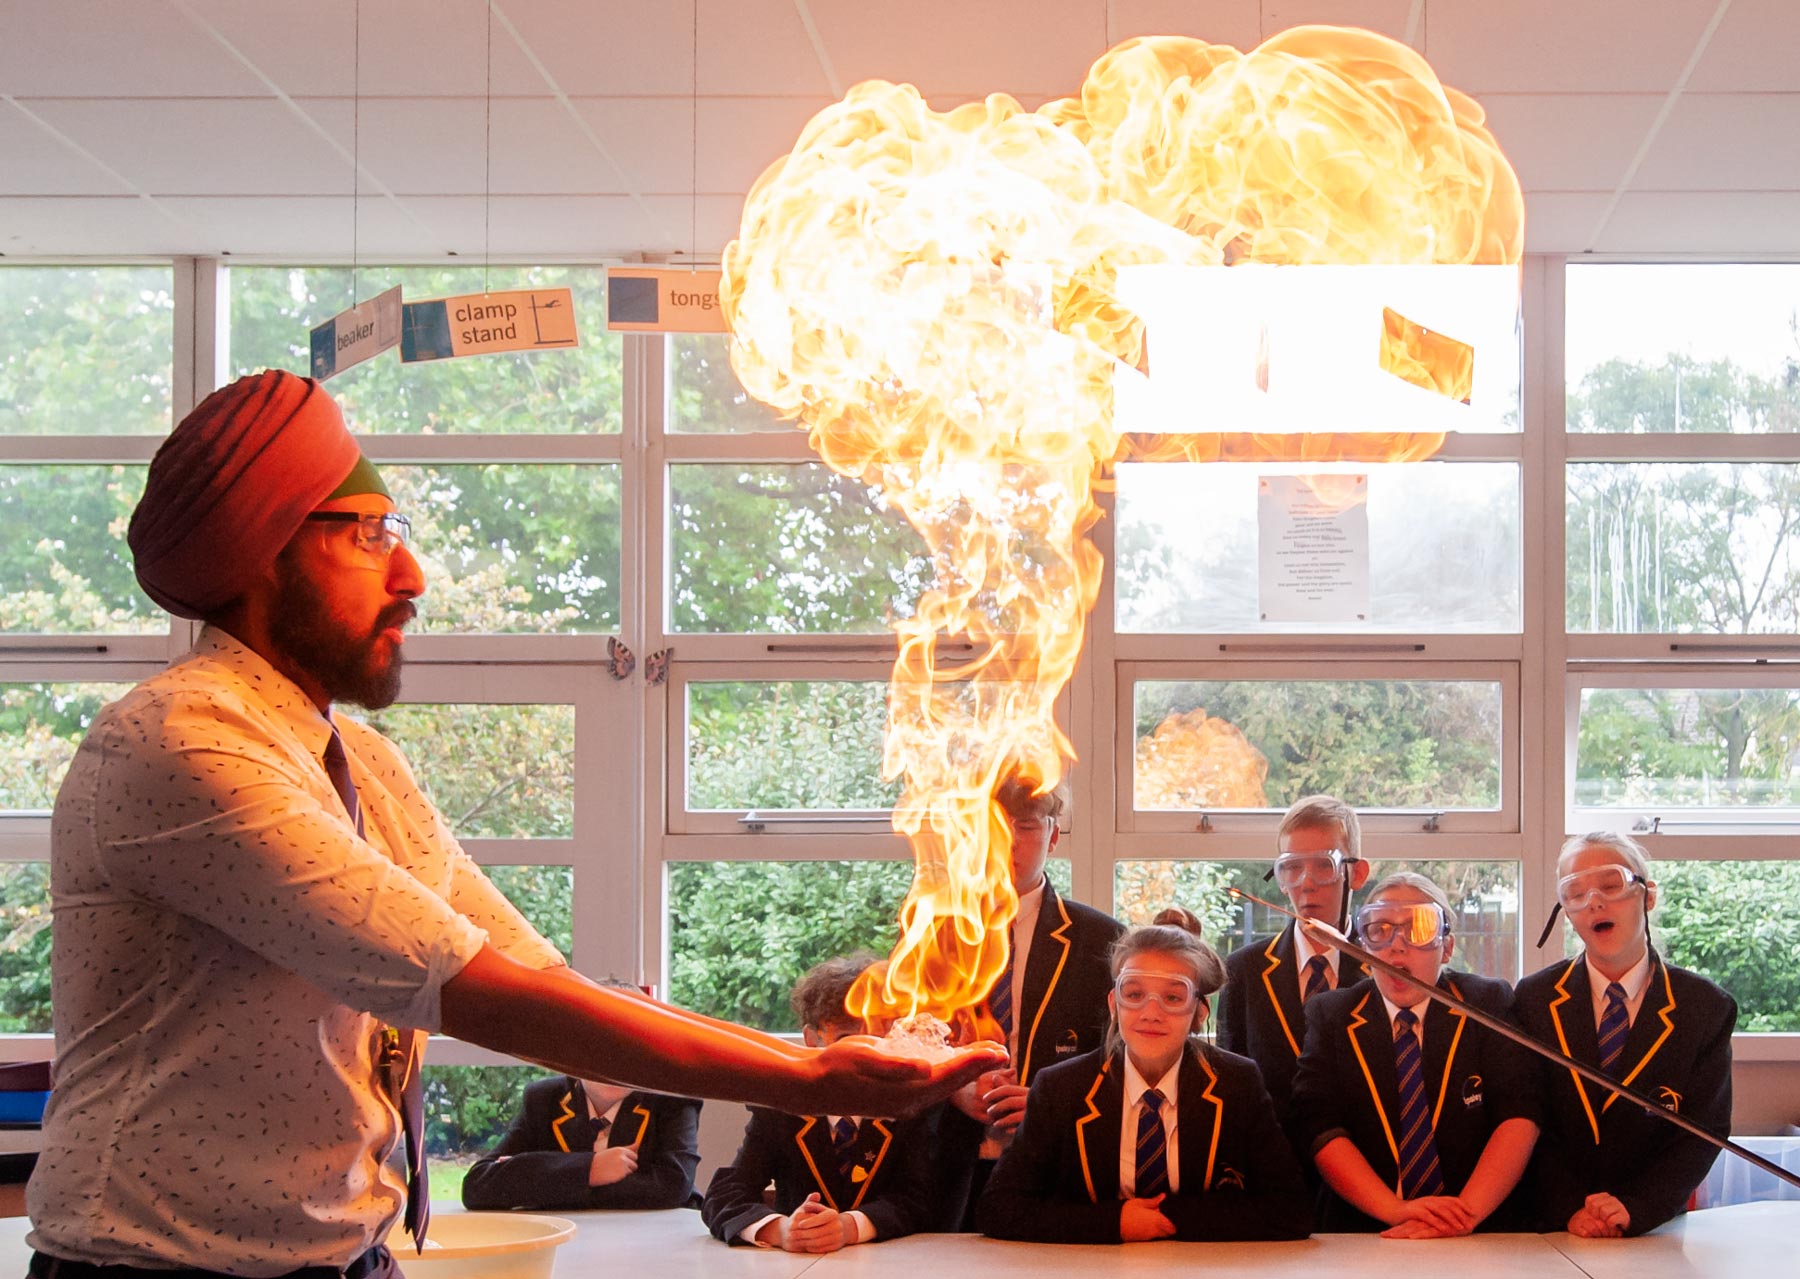 School website photography of methane bubble demonstration in the classroom